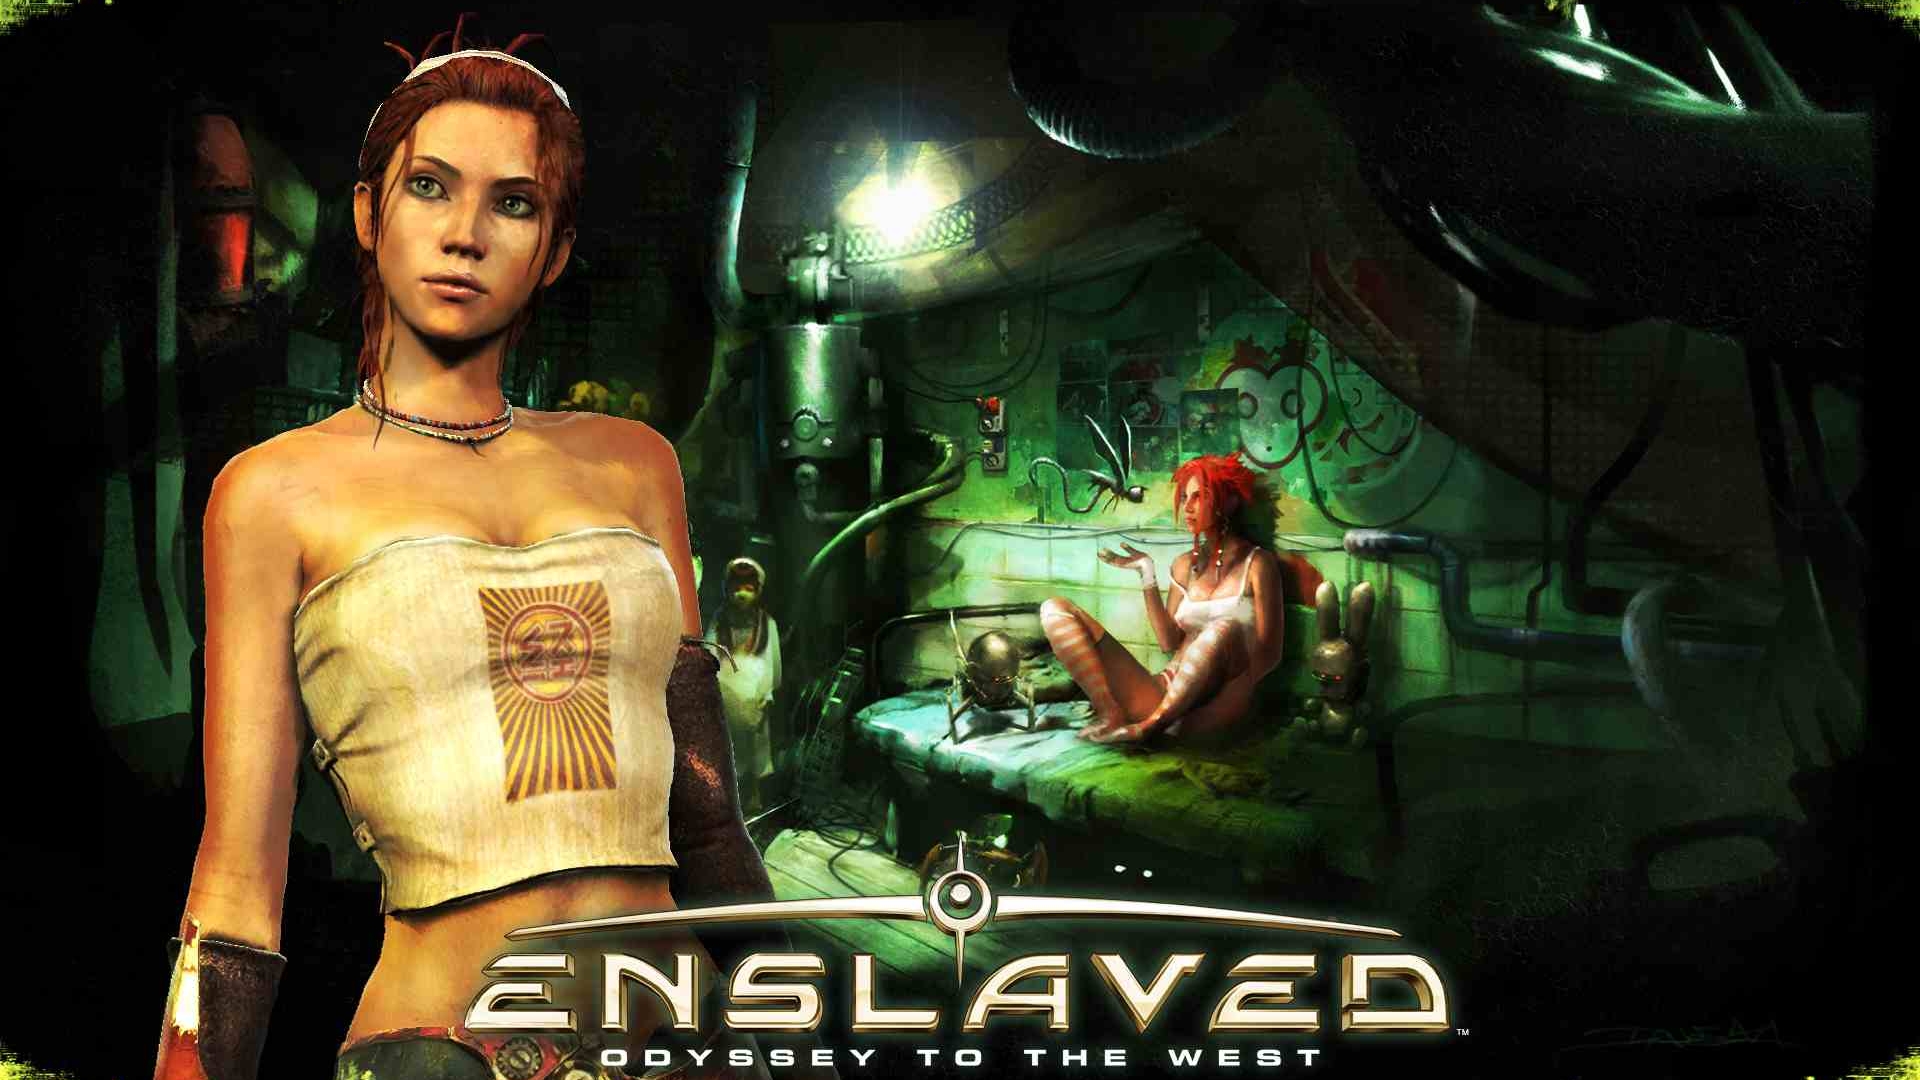 Enslaved: Odyssey to the West video game concept art featuring stunning desktop wallpaper.